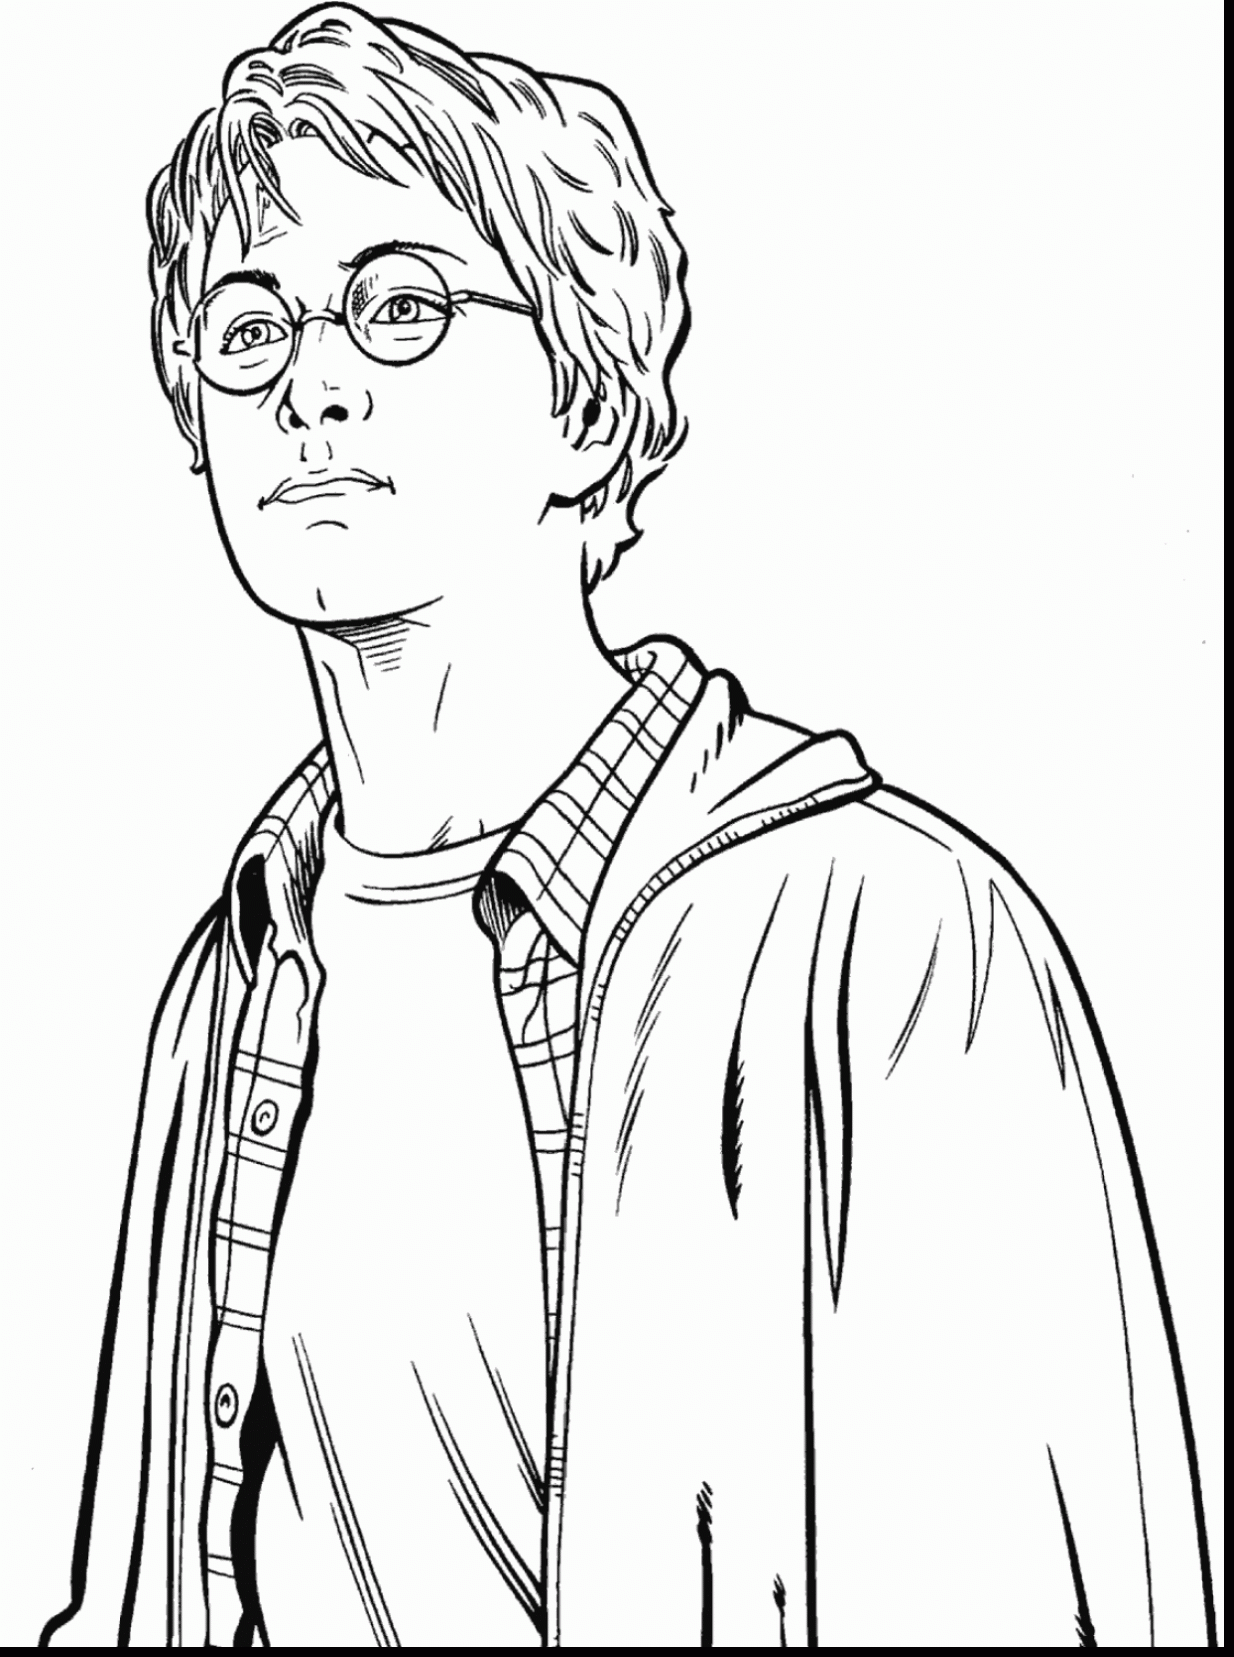 Cool Harry Potter Coloring Page - Free Printable Coloring Pages for Kids